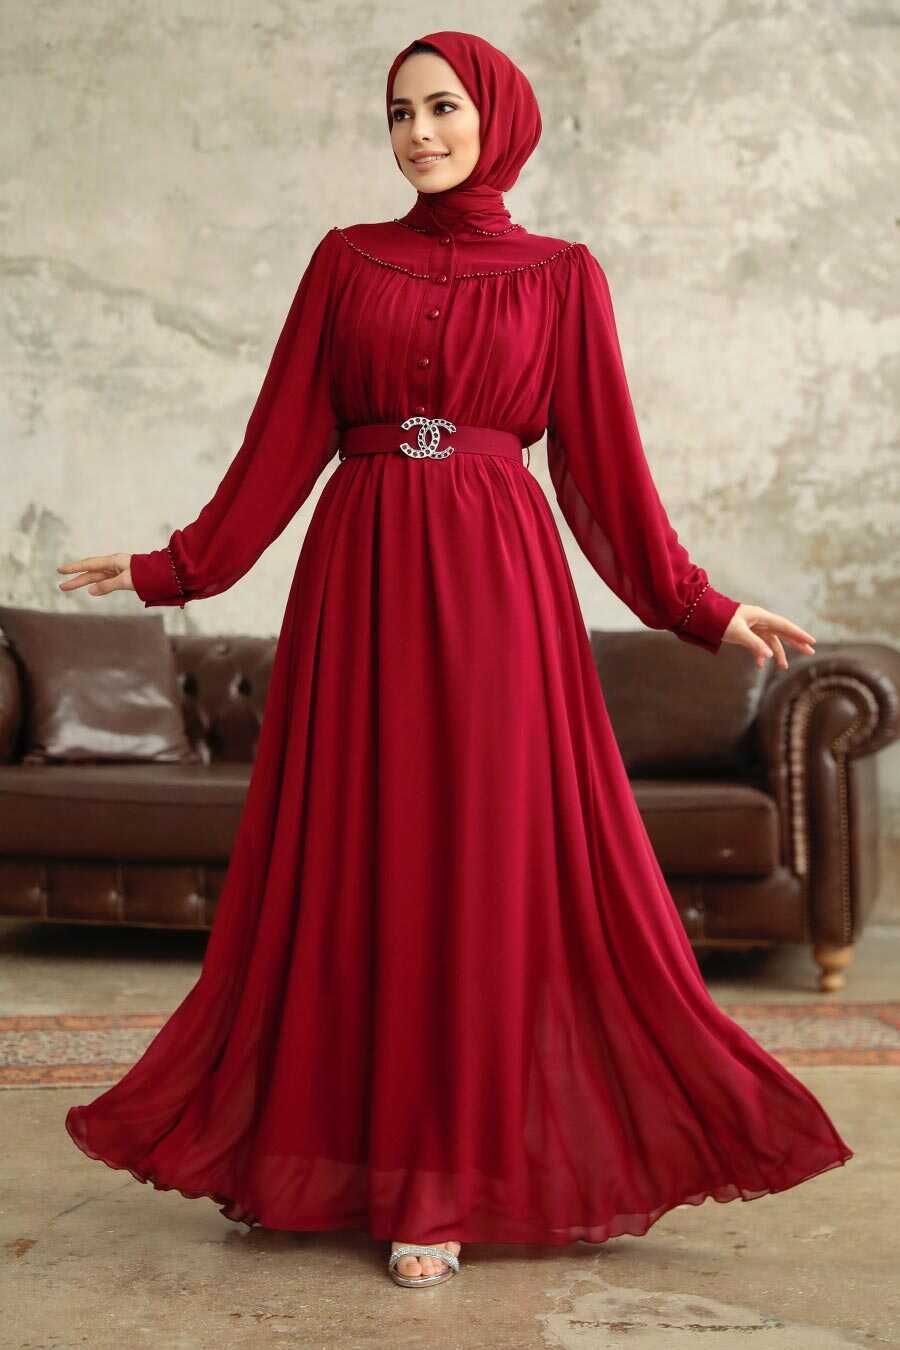 Neva Style - Claret Red Hijab For Women Dress 33284BR